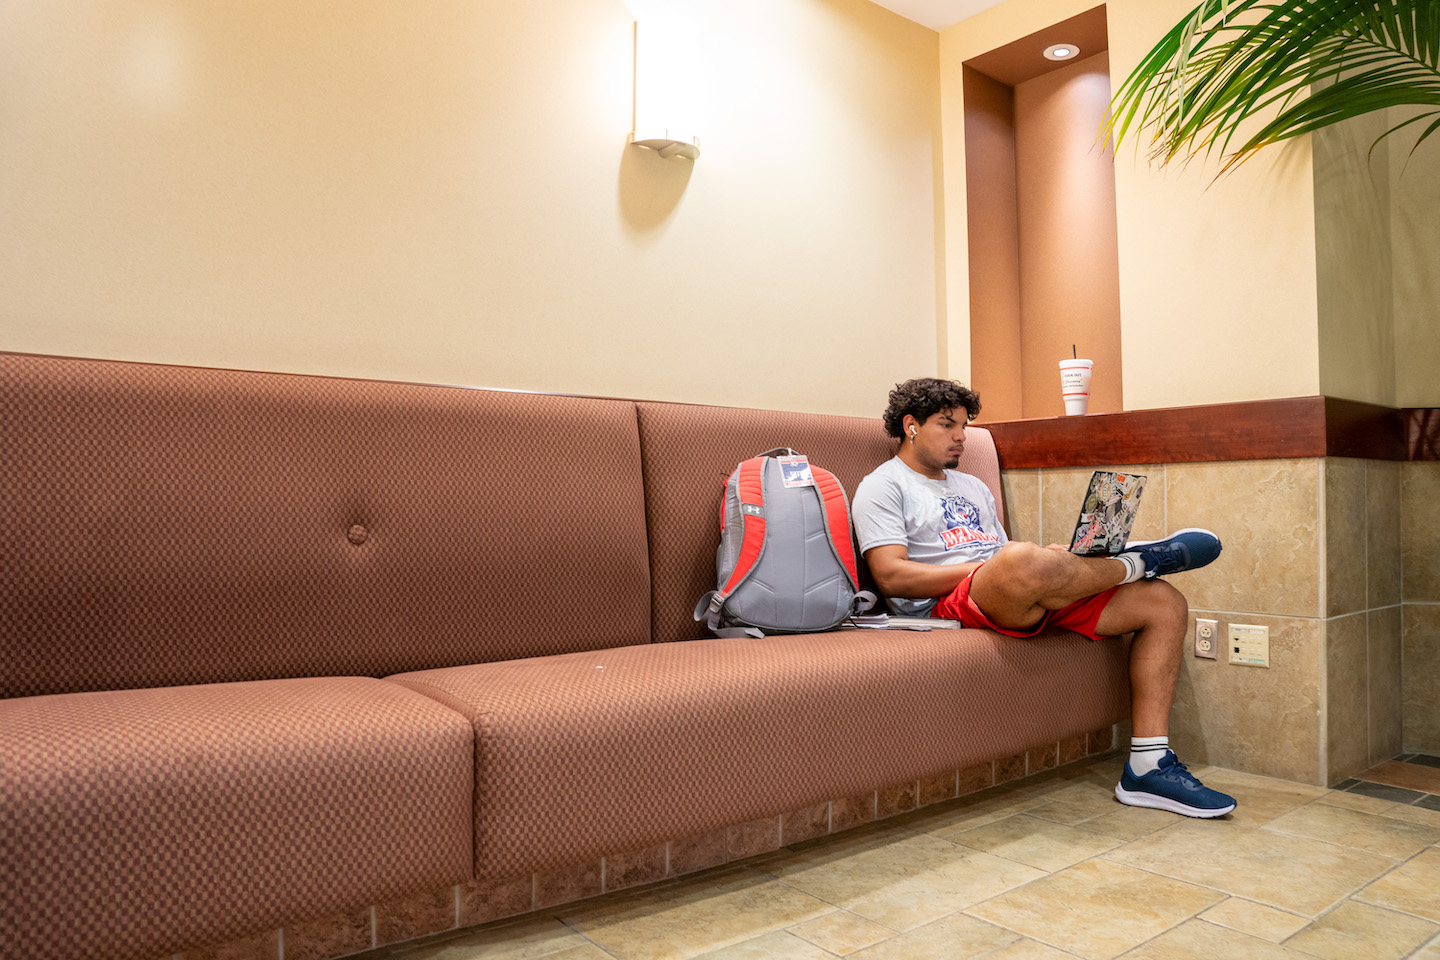 Ever Turcios studying in Beaman student center.